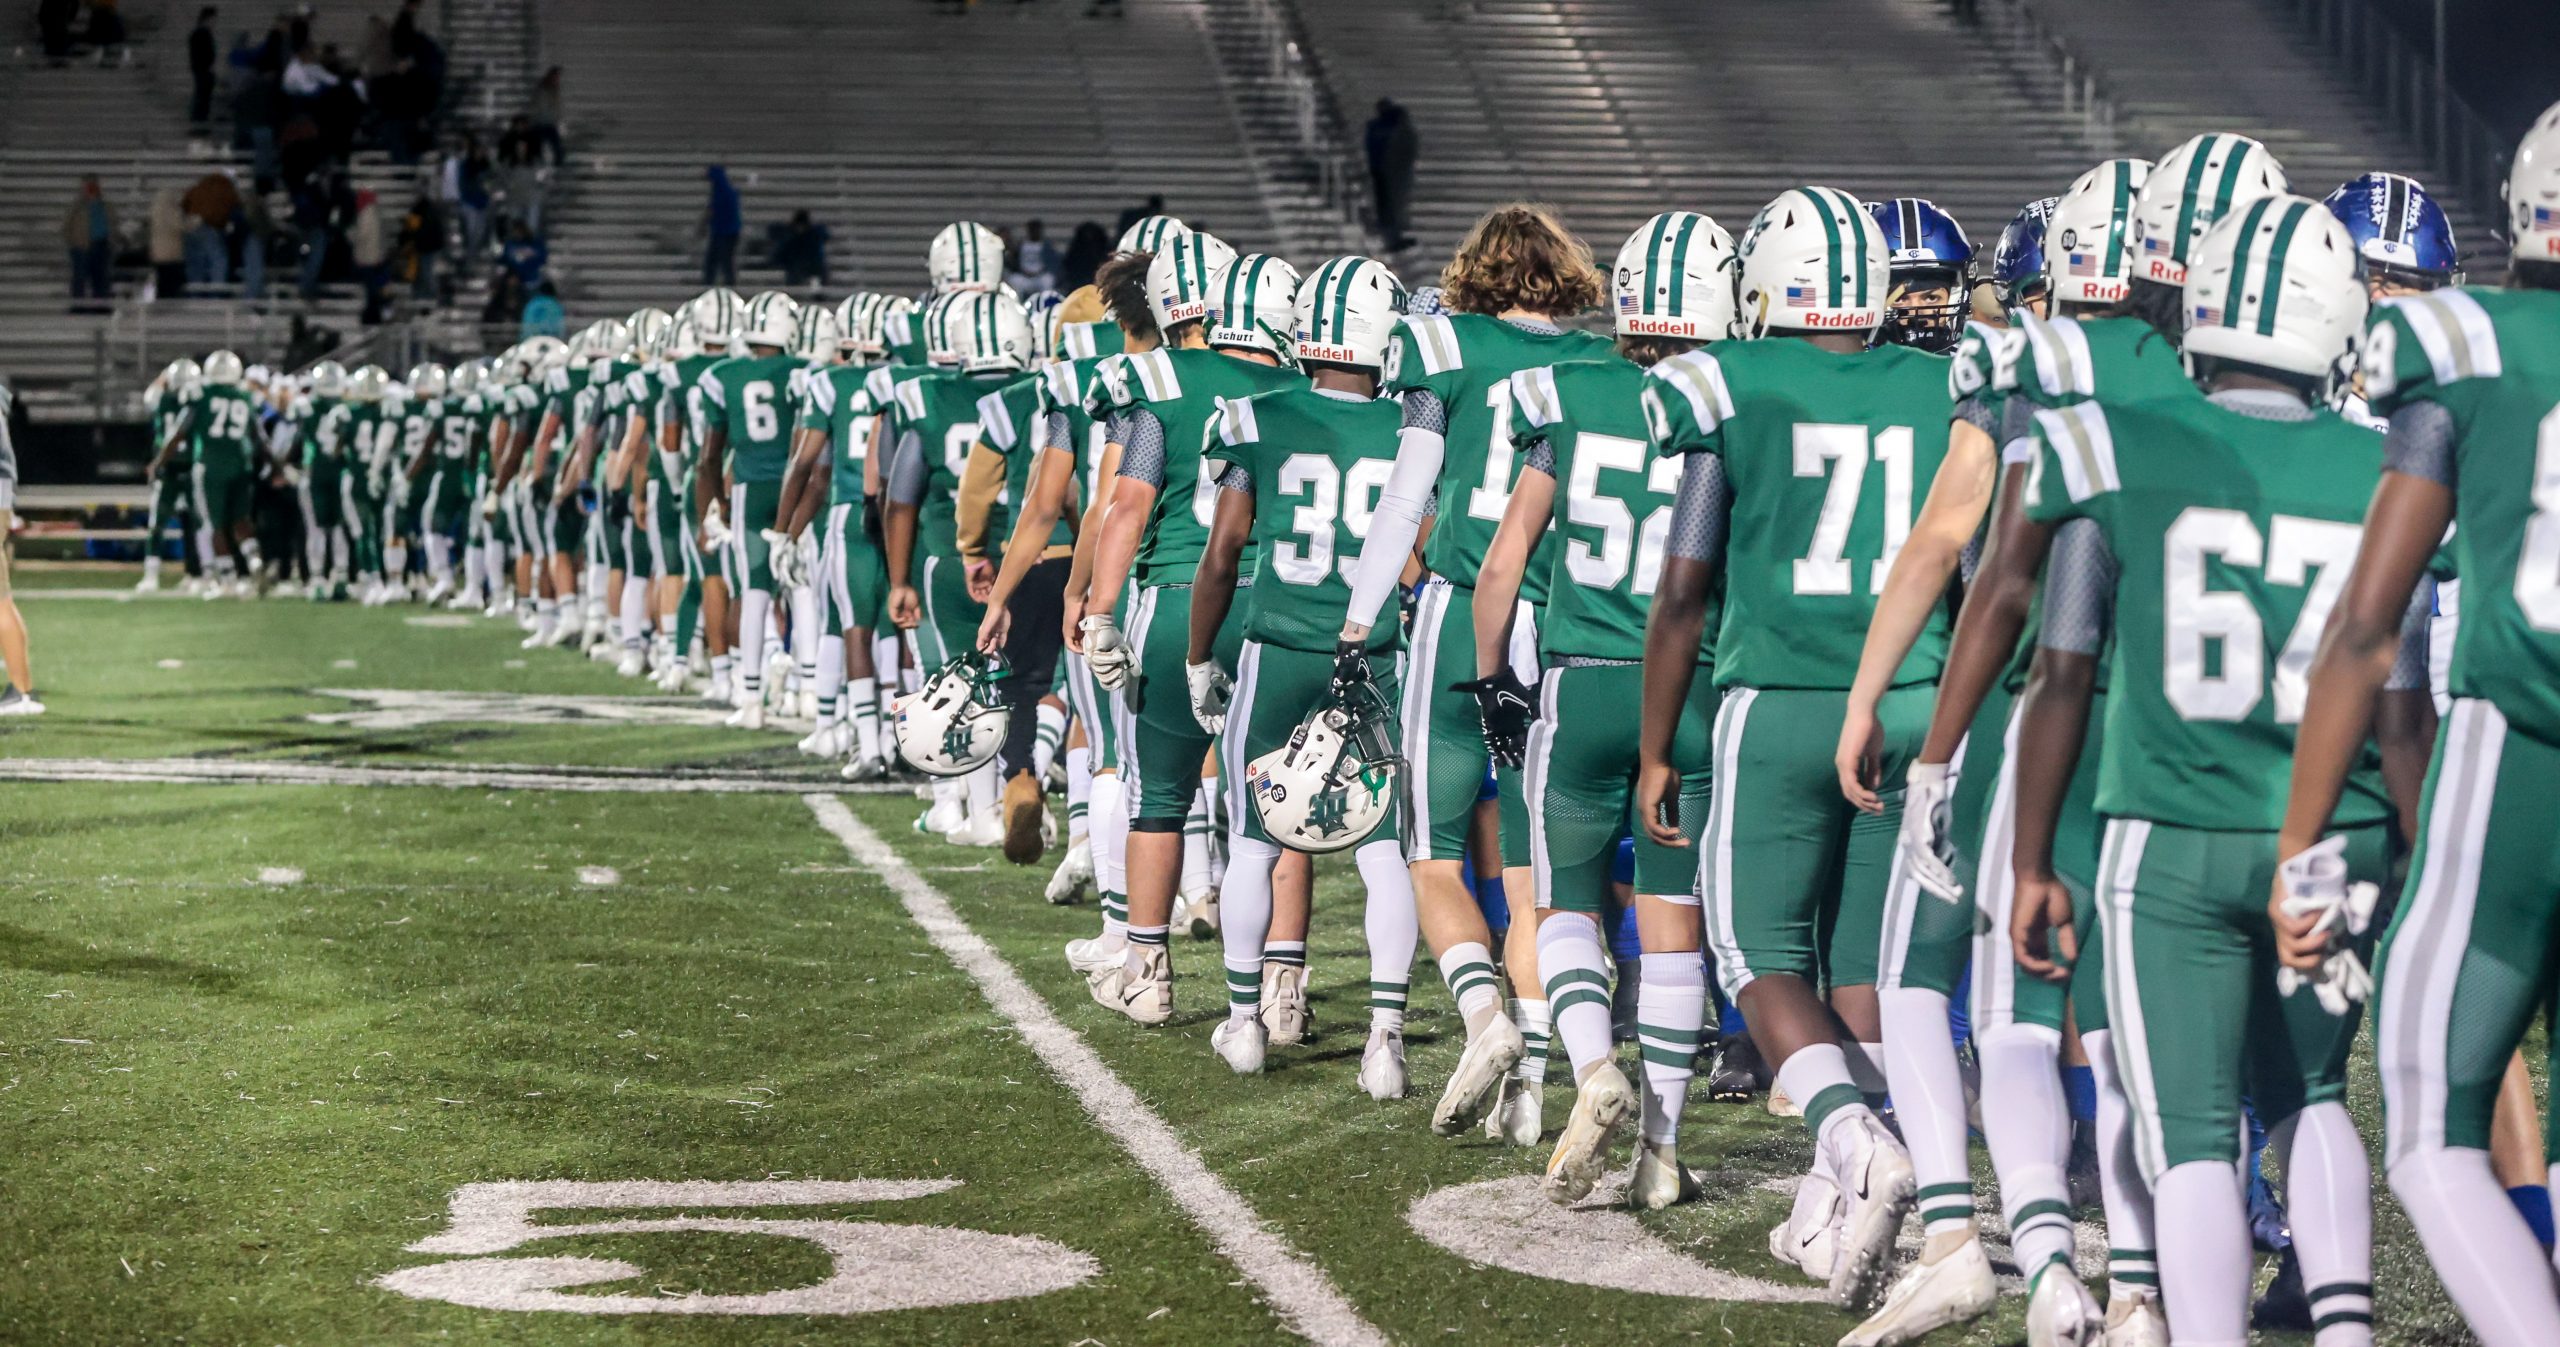 Dutch Fork overcame early season tragedy to reach the Class 5A state championship for the sixth straight season. They suffered the death of offensive lineman Jack Alkhatib in late August and mourned the loss of their teammate all season. “It’s been a very long and tough year,” says Dutch Fork coach Tom Knotts. “I’m proud of the way we battled about it and got here.”